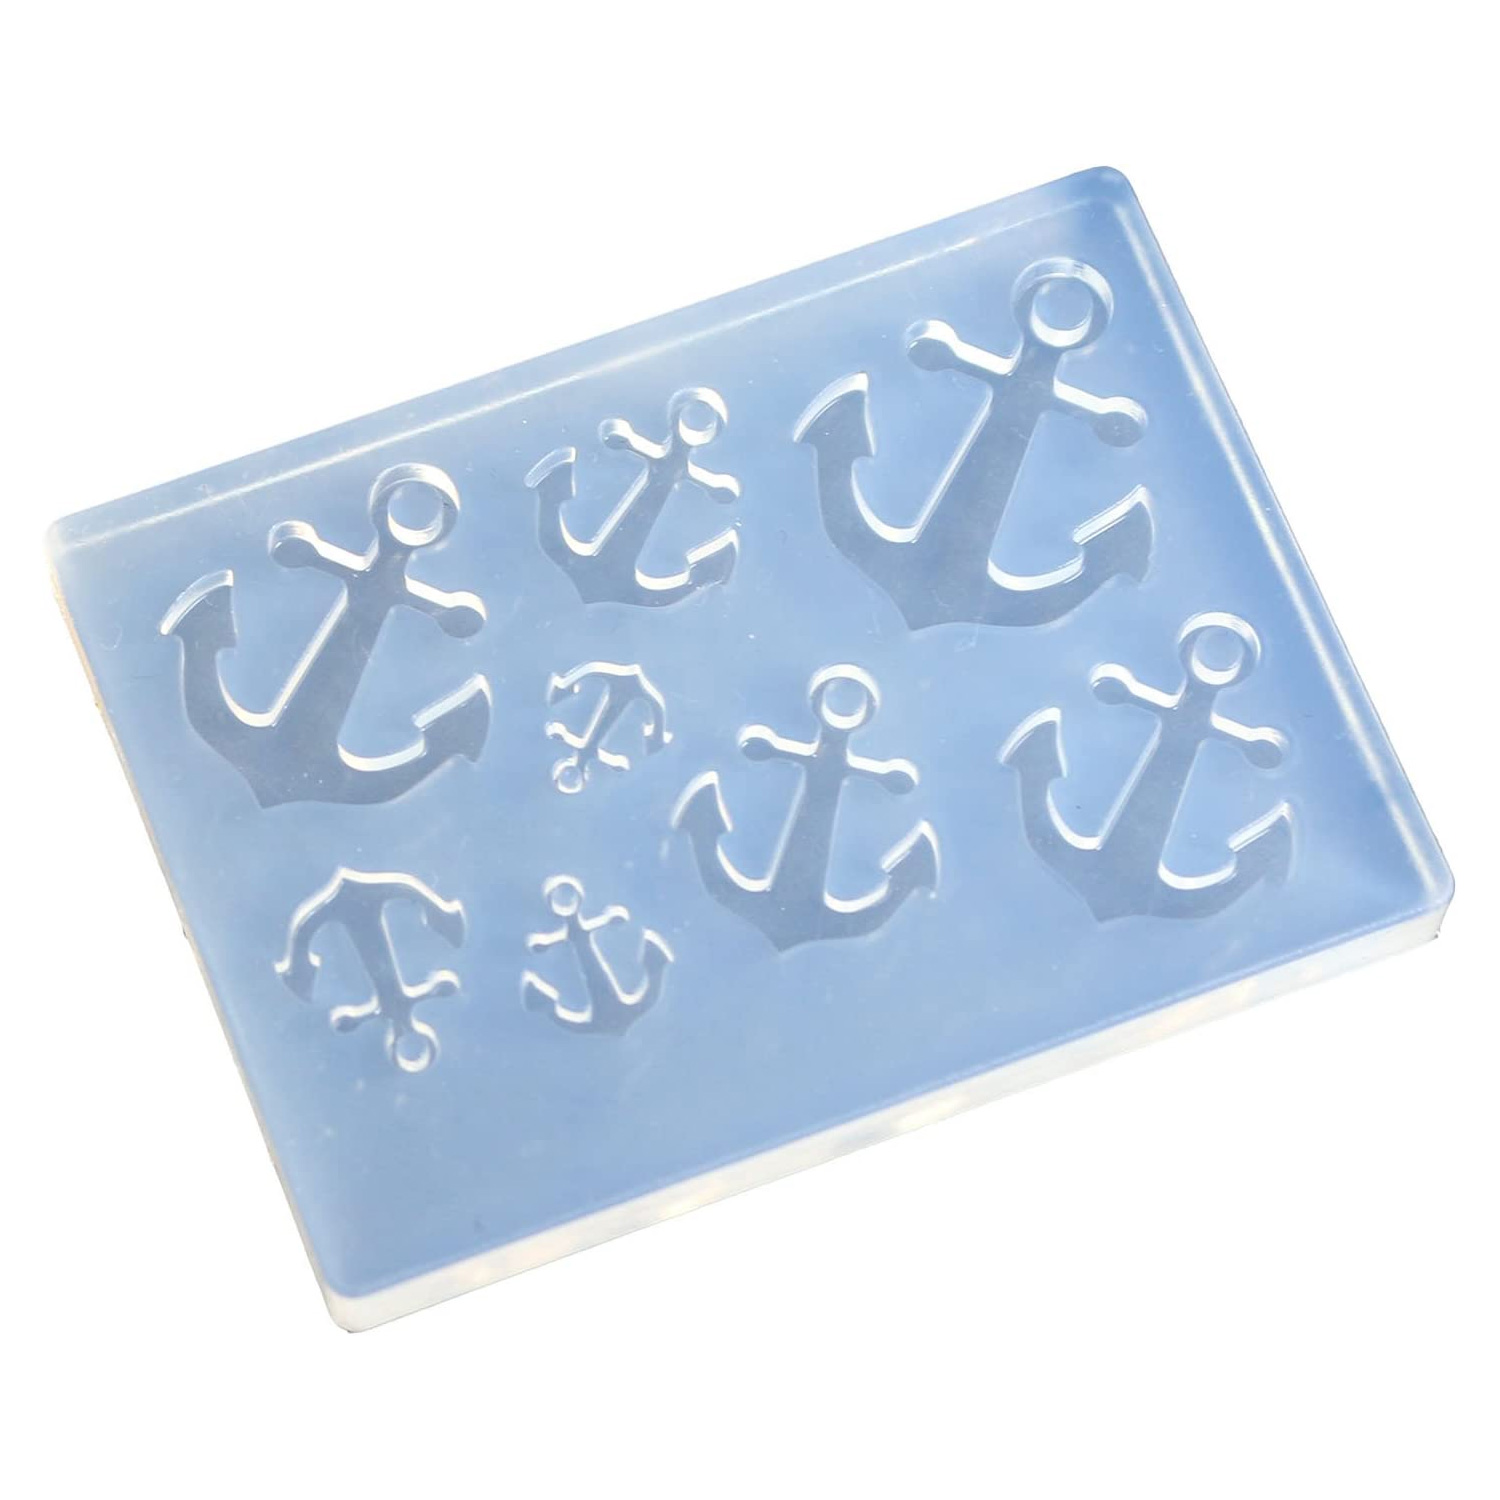 KAM-REJ-605  Resin Crafting Silicone Mold  (pcs)